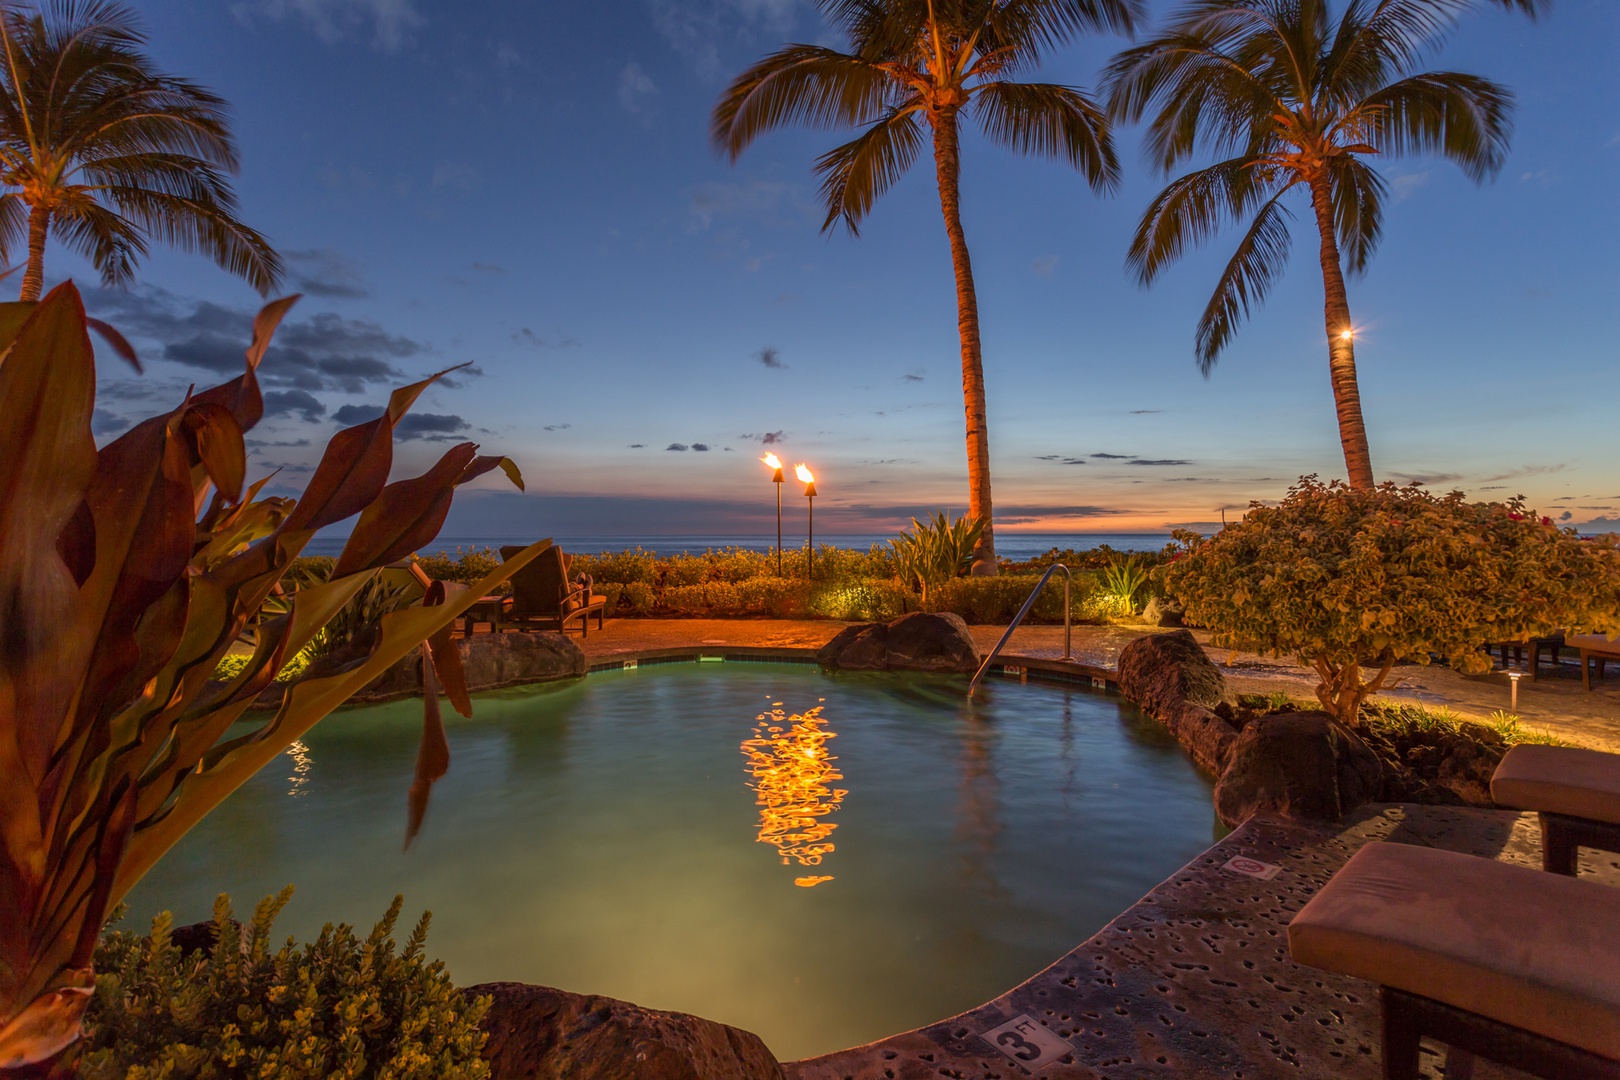 Waikoloa Vacation Rentals, 2BD Hali'i Kai 12C at Waikoloa Resort - Yet another portion of the pool at twilight - a sand bottom hot tub is also on offer at this fabulous oceanfront amenities center.